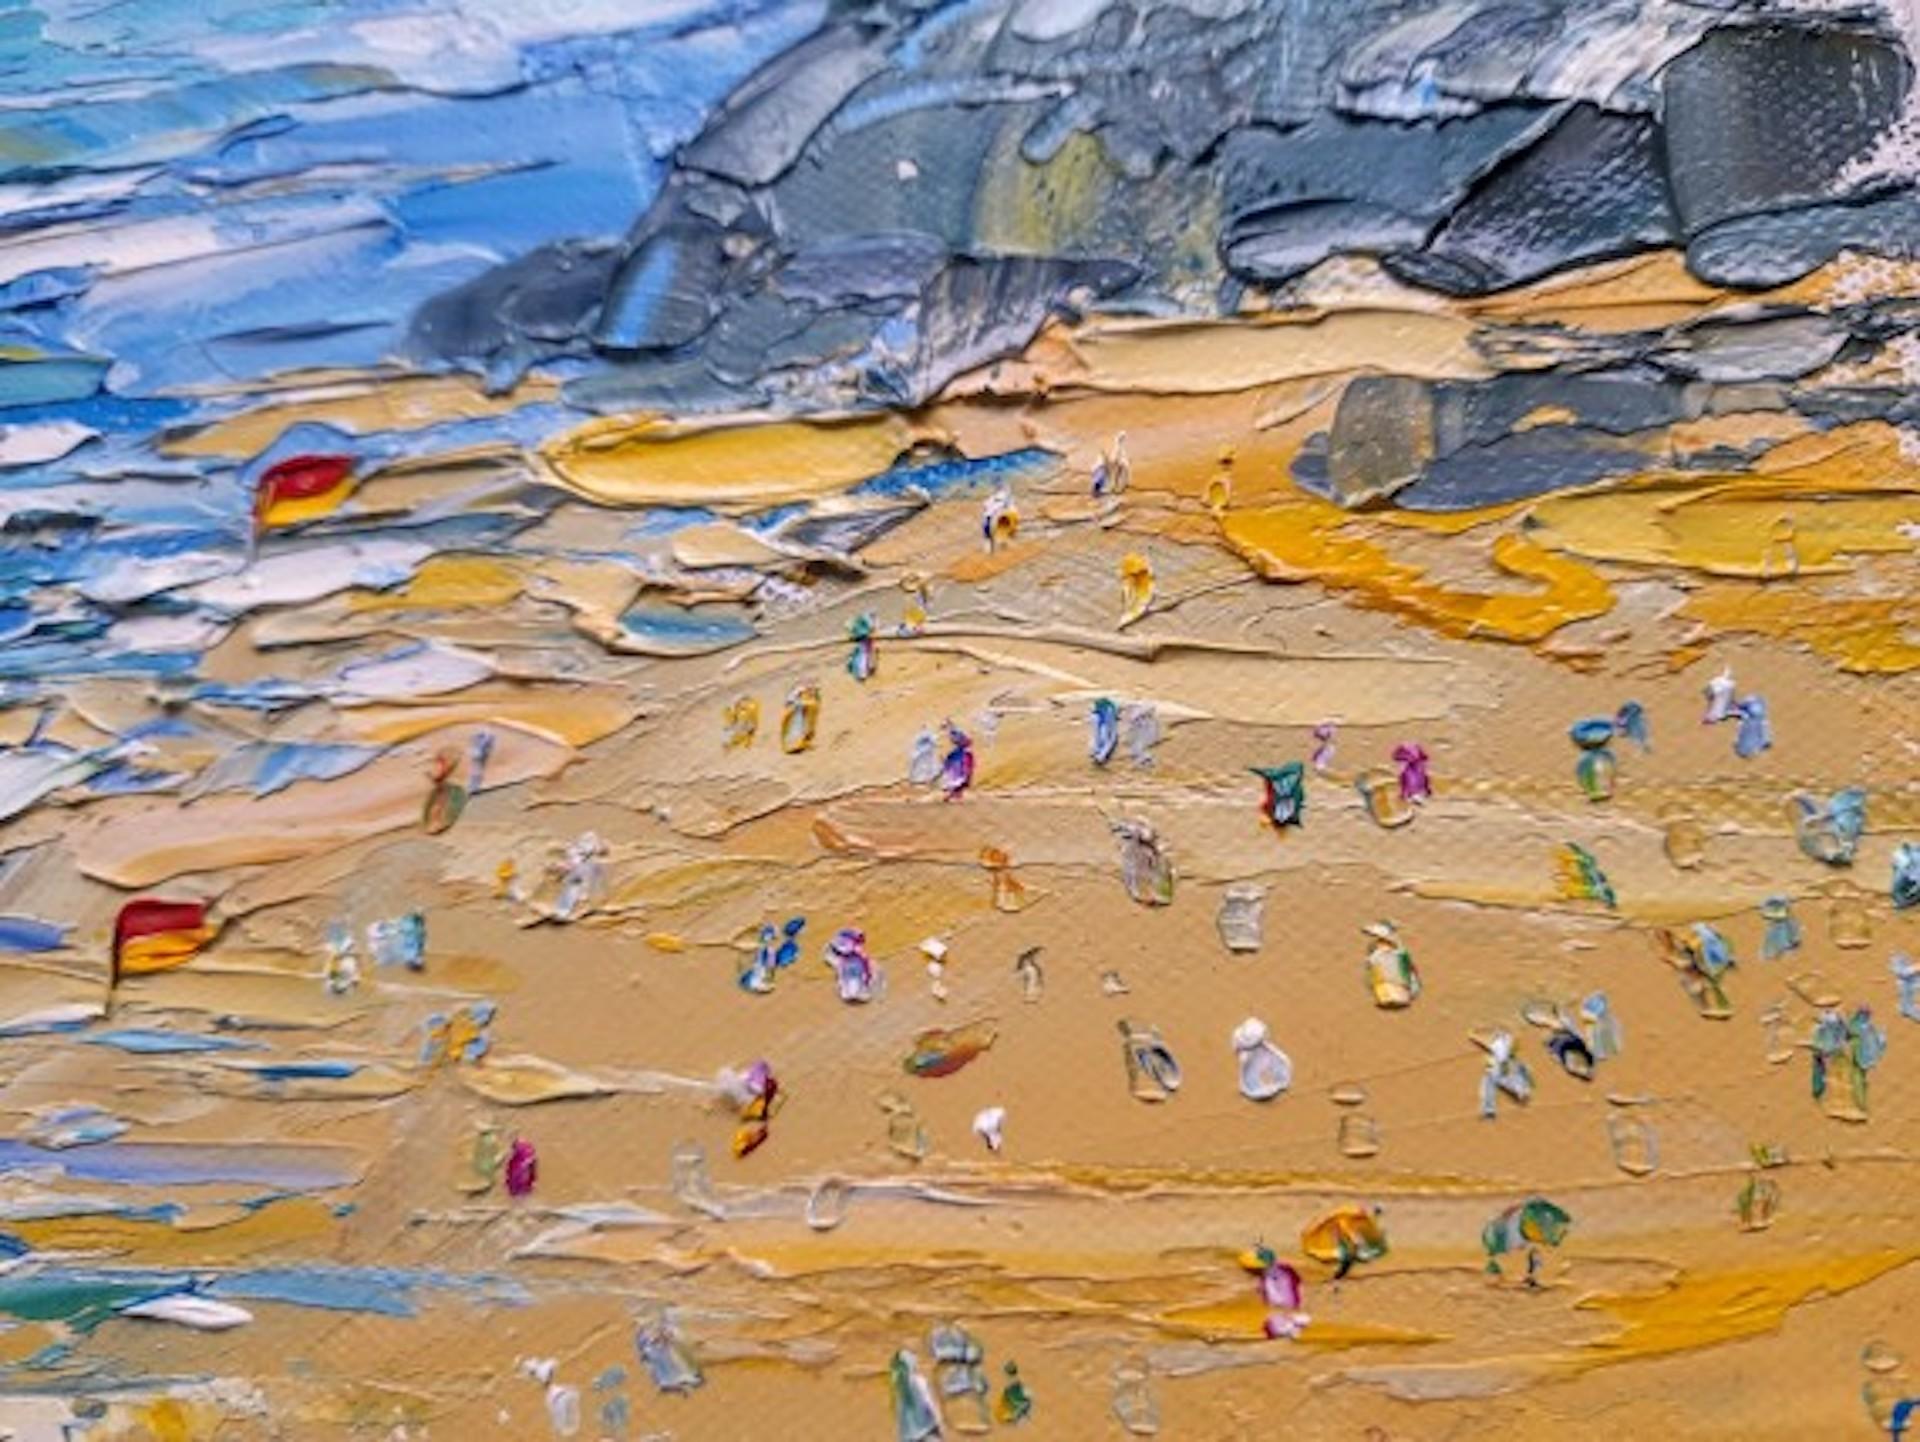 Bude Beach IIII by Georgie Dowling [2021]
original

Oil paint on canvas

Image size: H:20 cm x W:32 cm

Complete Size of Unframed Work: H:20 cm x W:32 cm x D:2cm

Sold Unframed

Please note that insitu images are purely an indication of how a piece